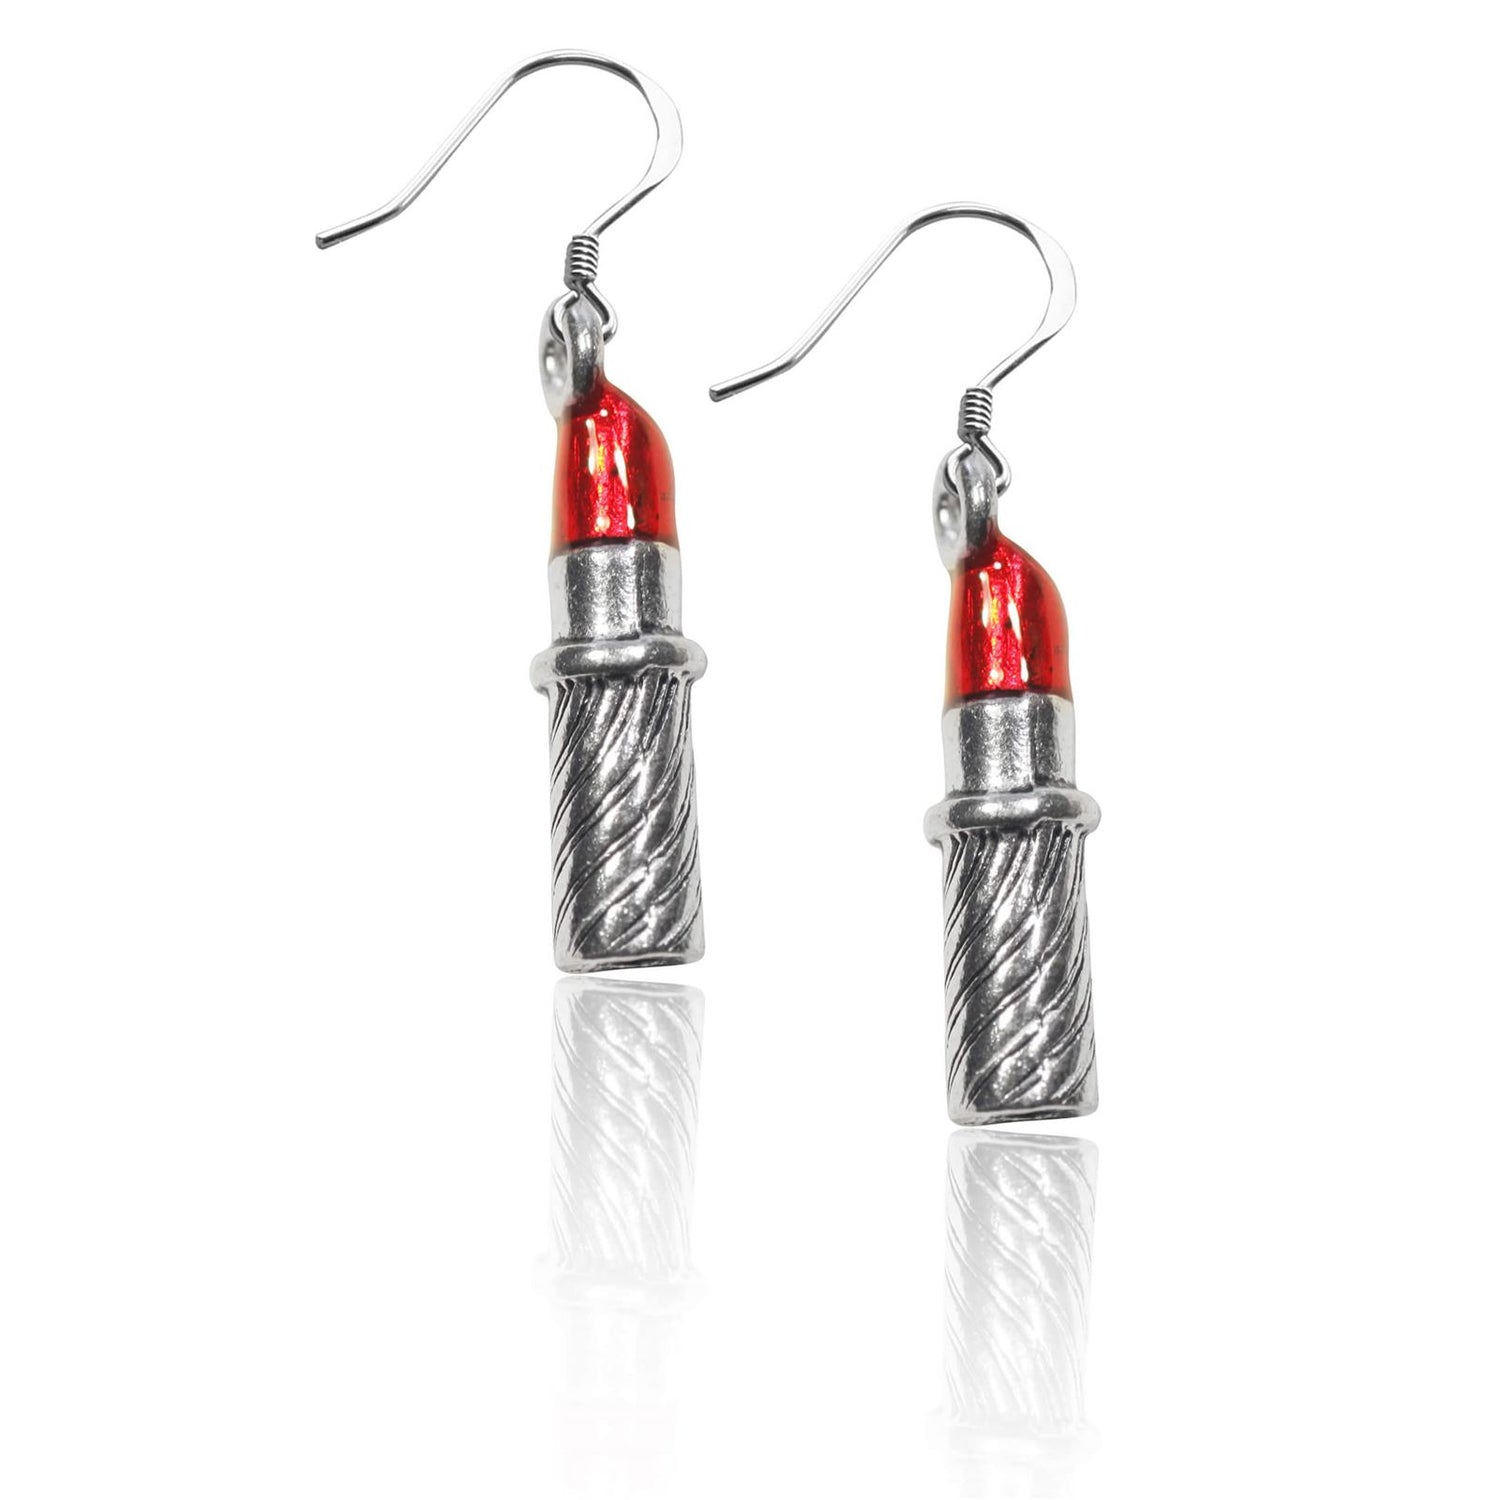 Whimsical Gifts | Lipstick Charm Earrings in Silver Finish | Hobbies & Special Interests | Fashionista | Jewelry